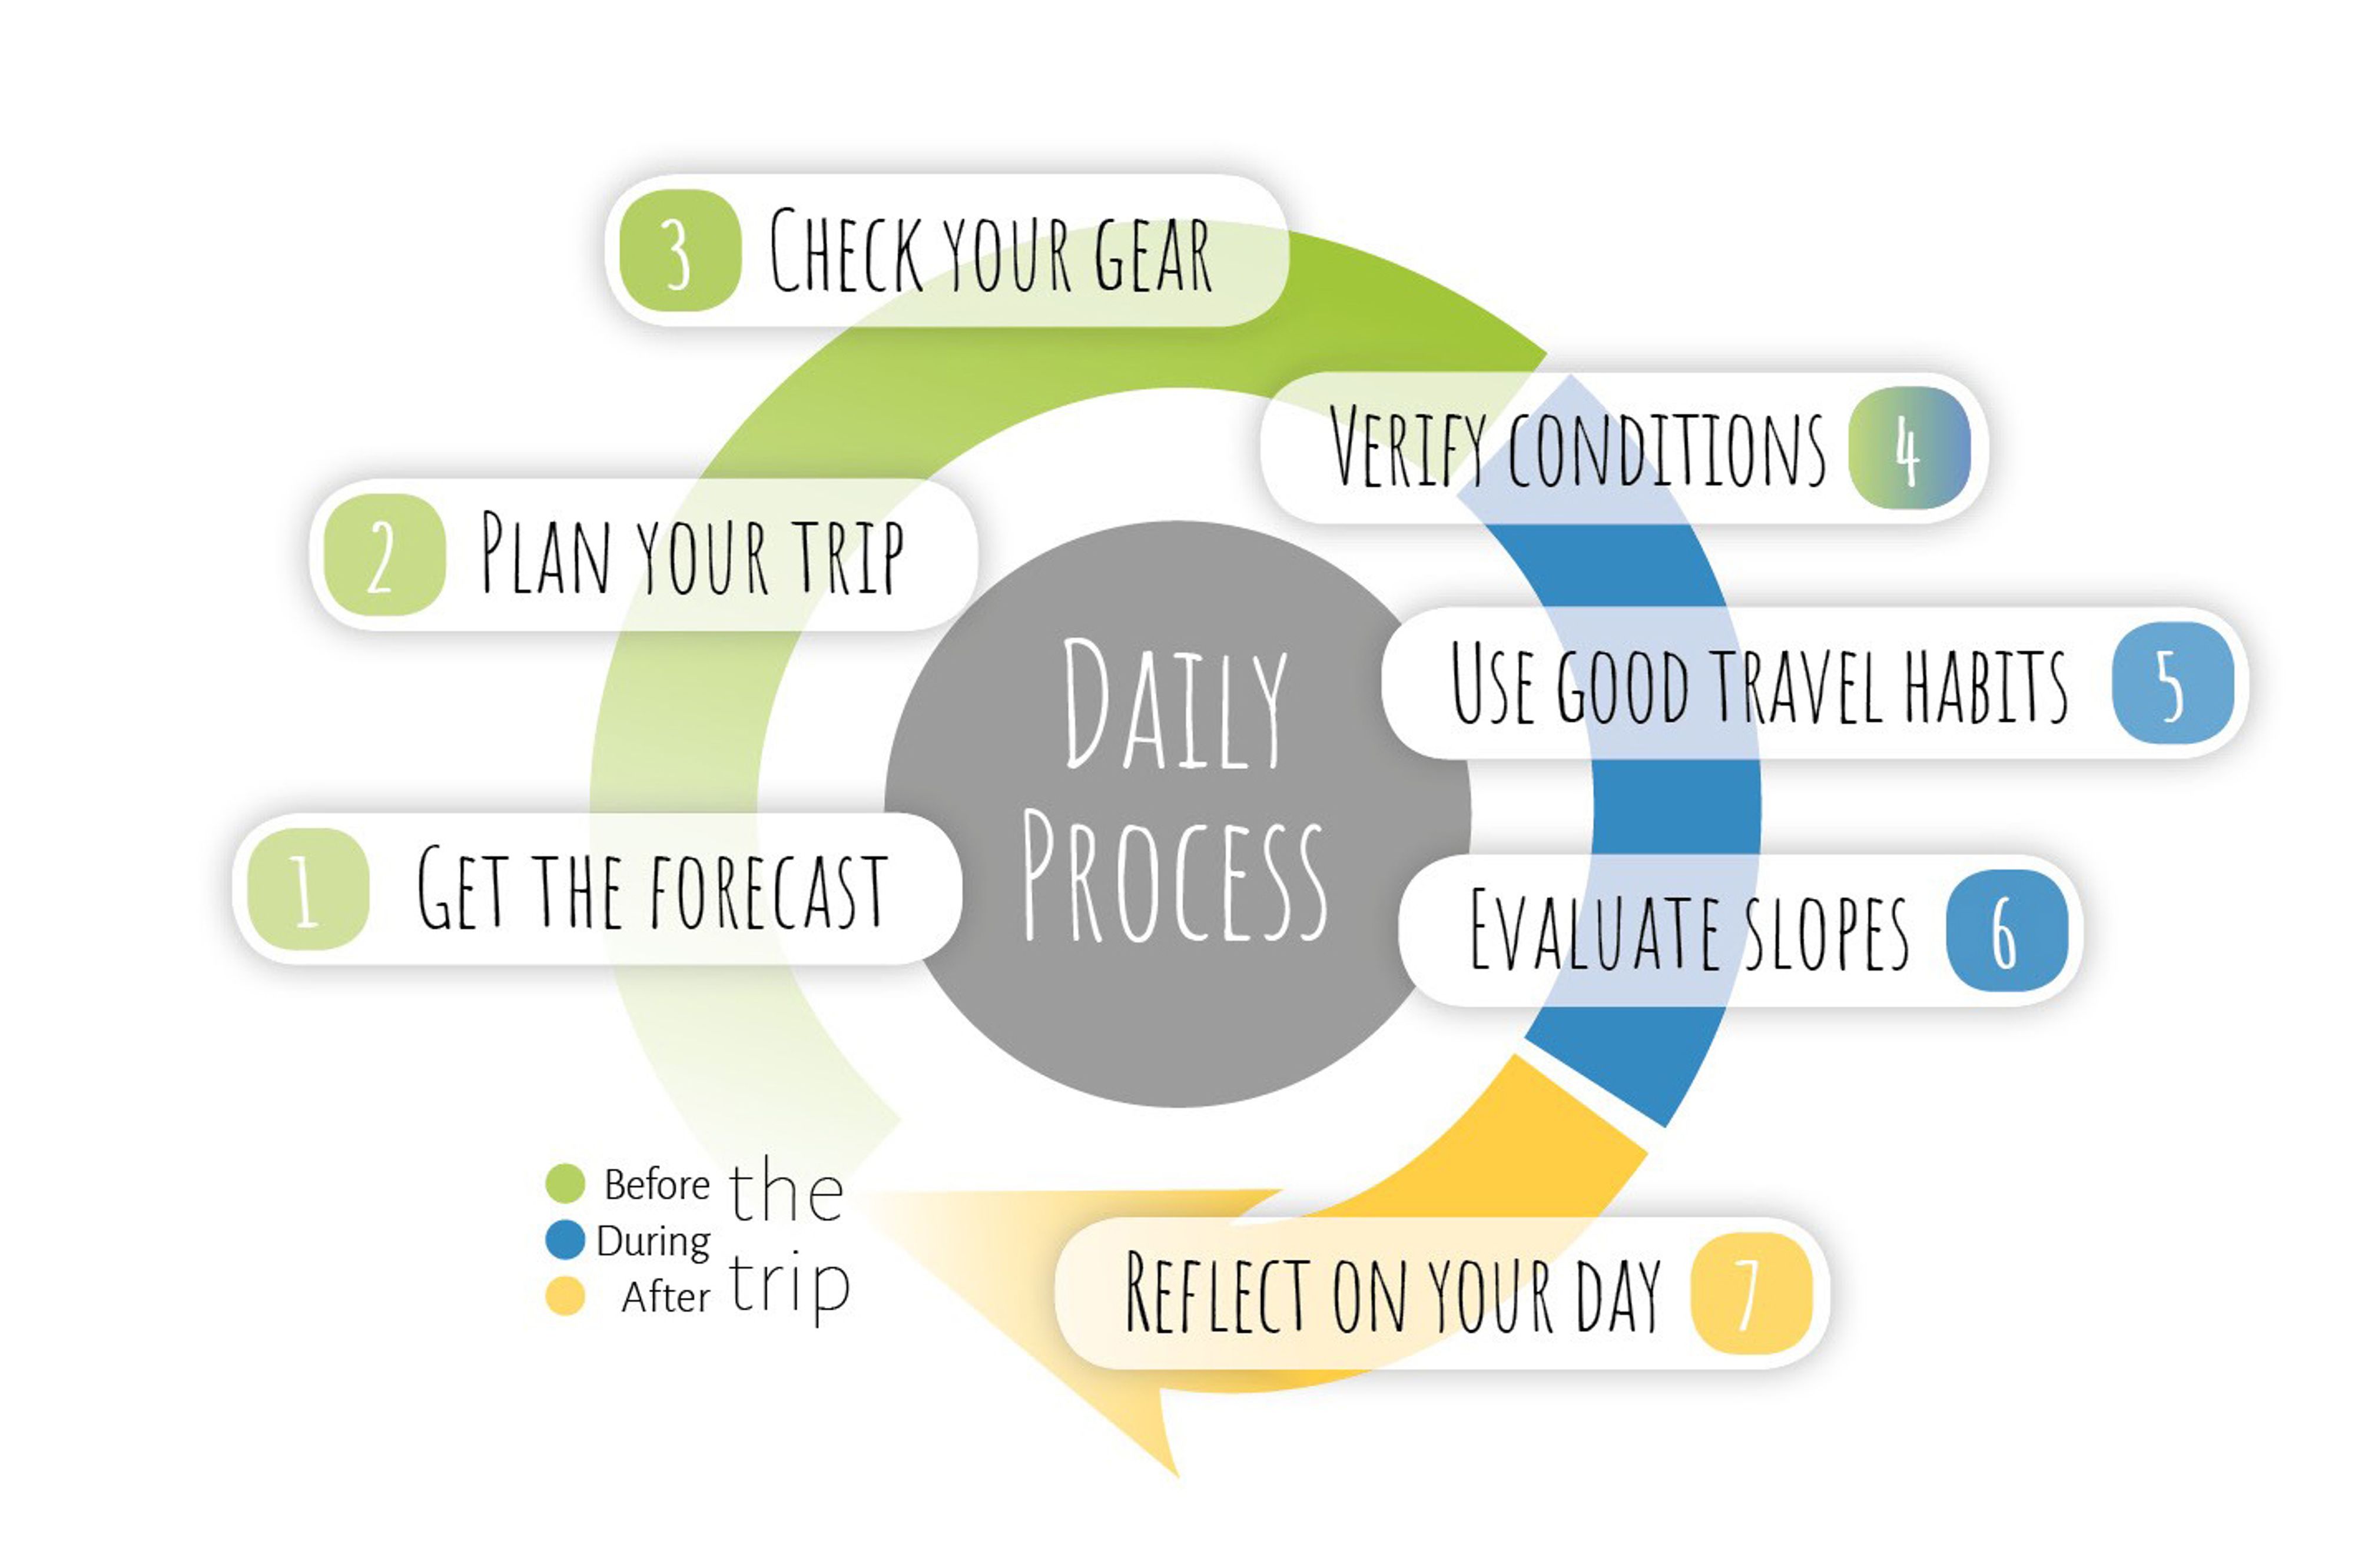 Daily Process graphic